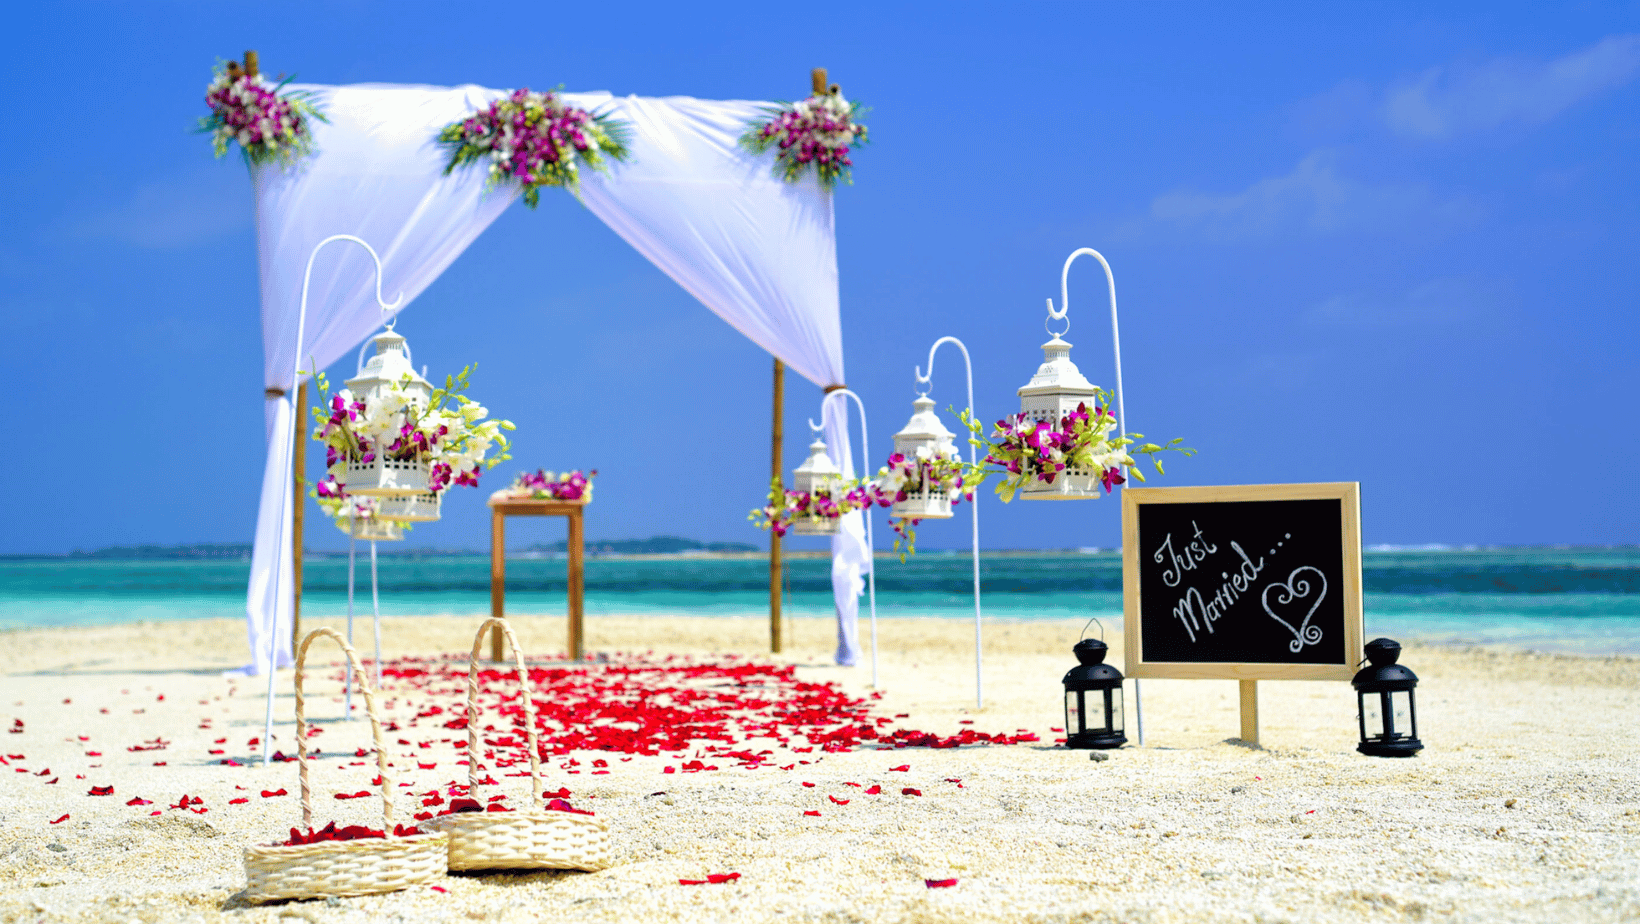 9 Tips to Plan a Great Destination Wedding